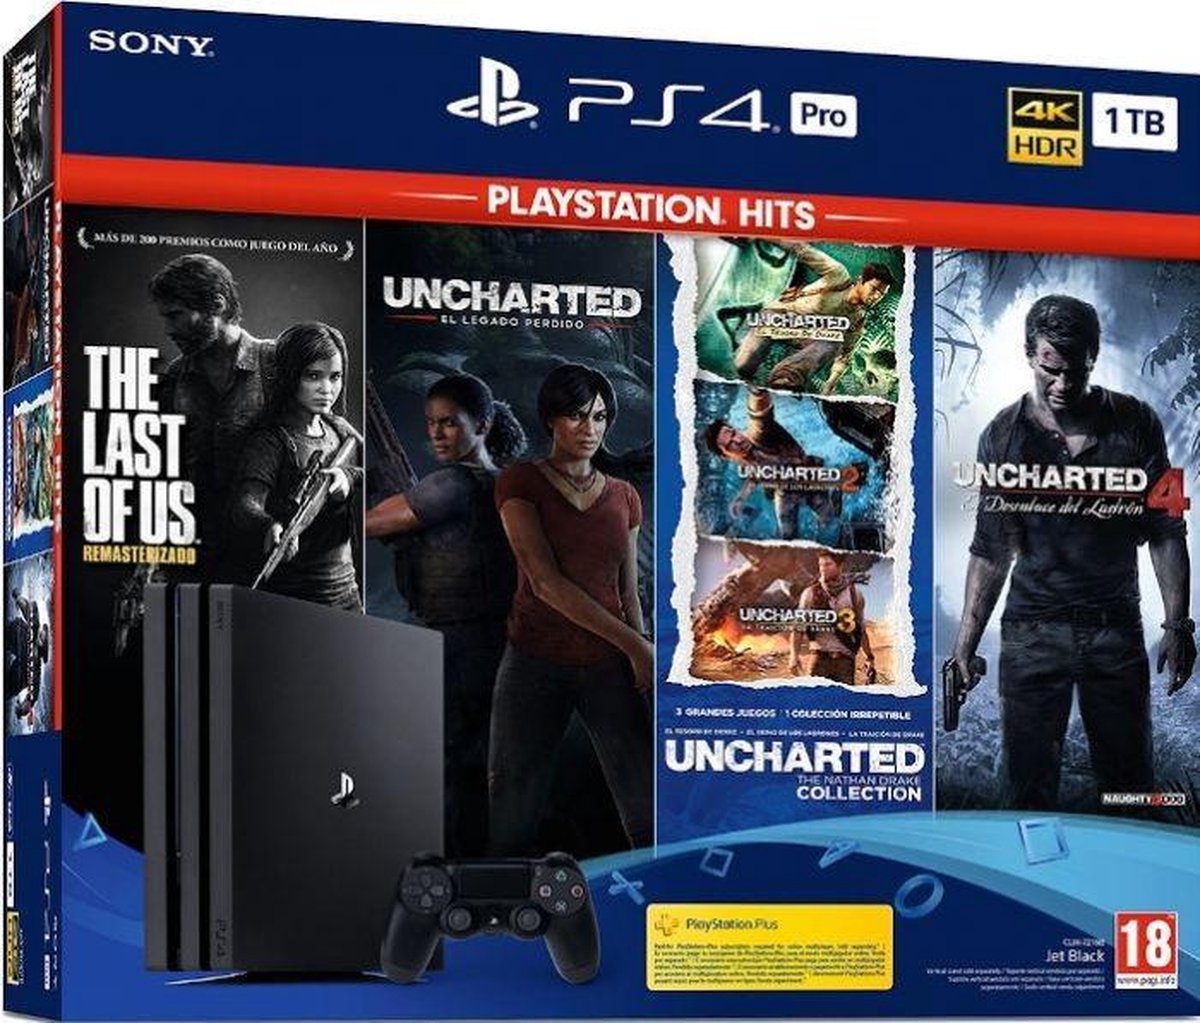 Sony PlayStation 4 Pro 1TB + The Last of Us + Uncharted Collection + Uncharted 4 - Black (EU) (PS4) - Sony